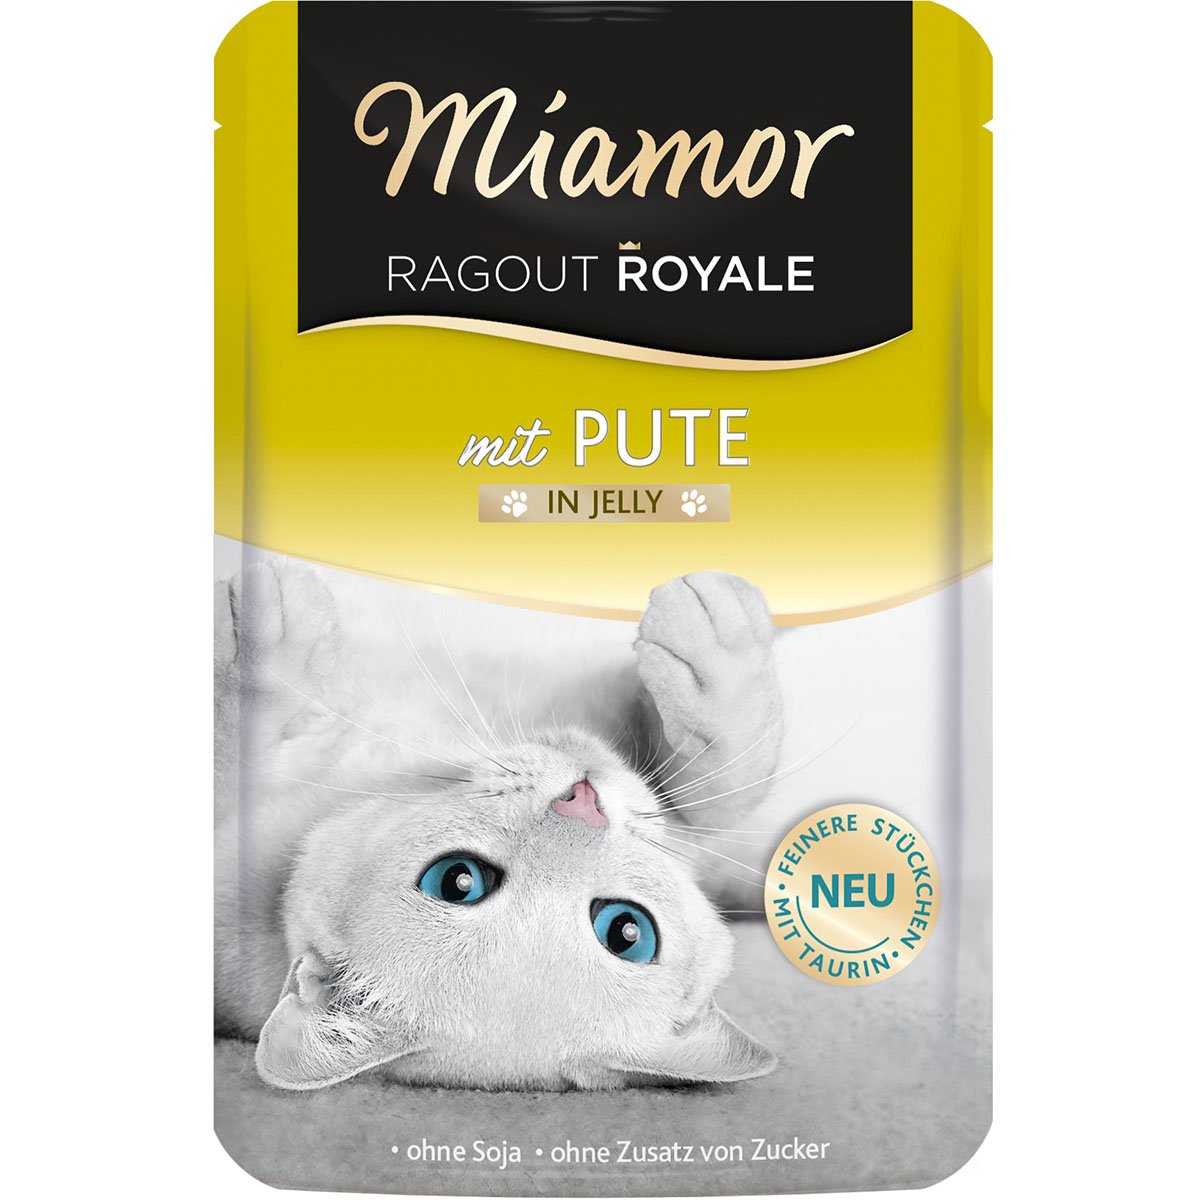 Miamor Ragout Royale Pute in Jelly 44x100g